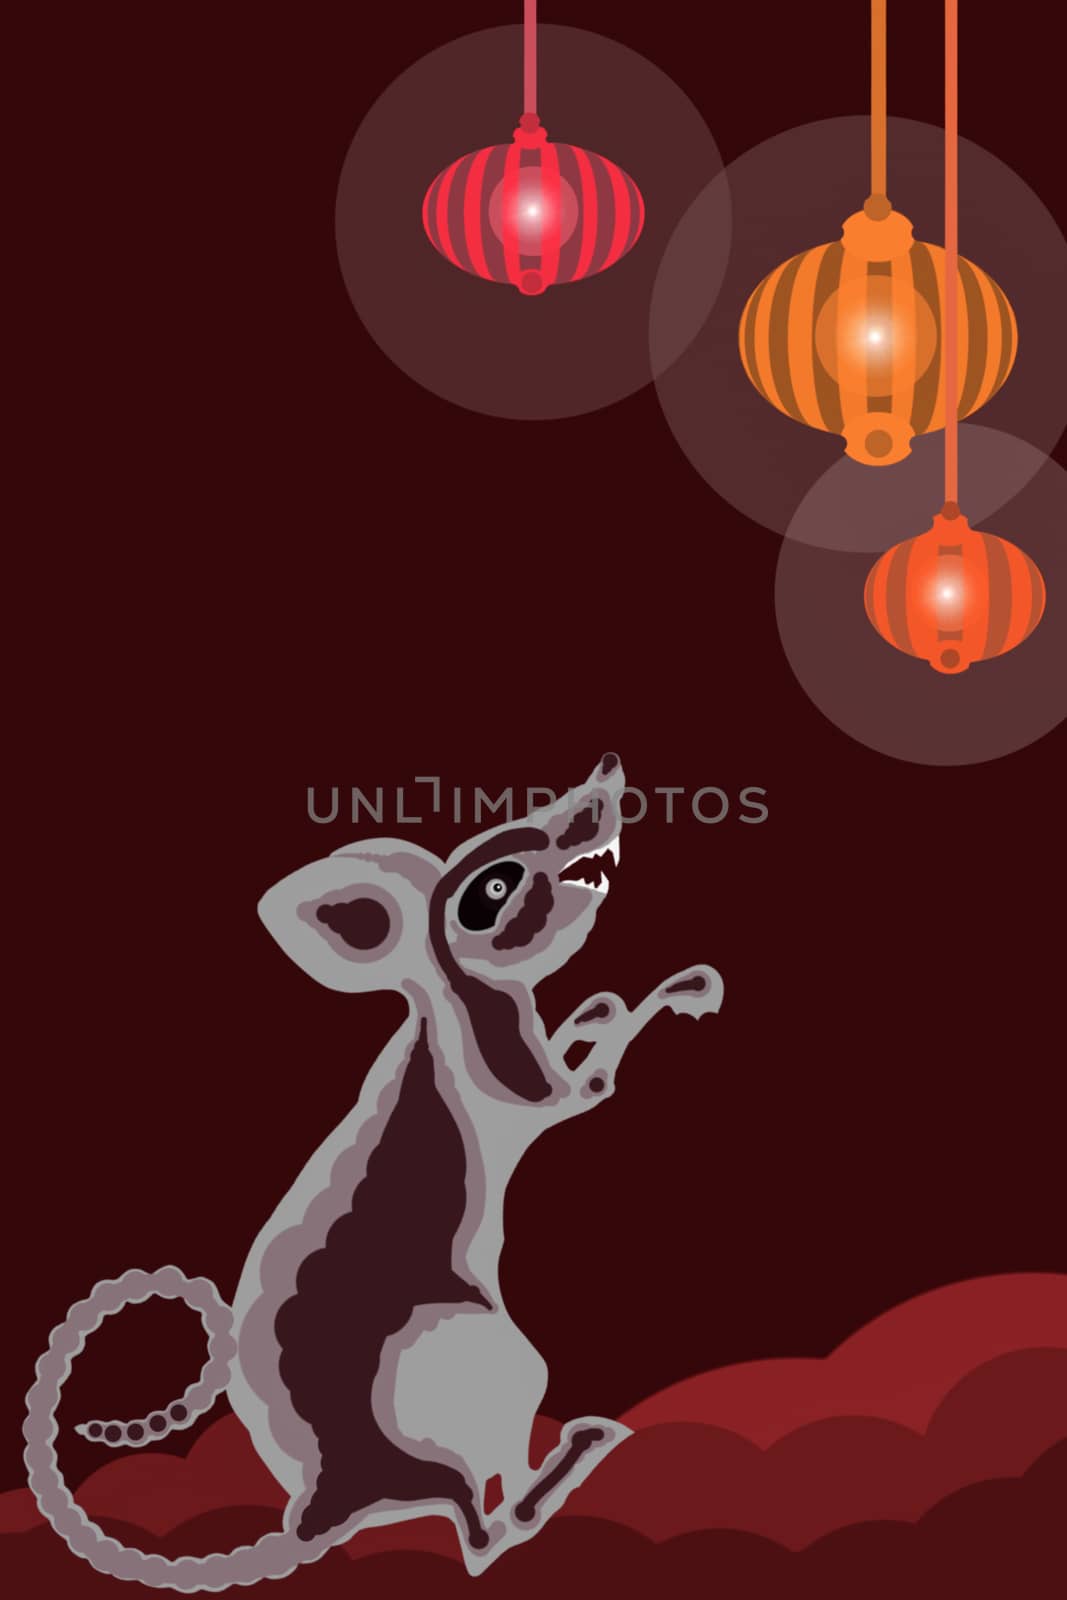 Rat rejoices at light of Chinese lights, associated with new year 's onset